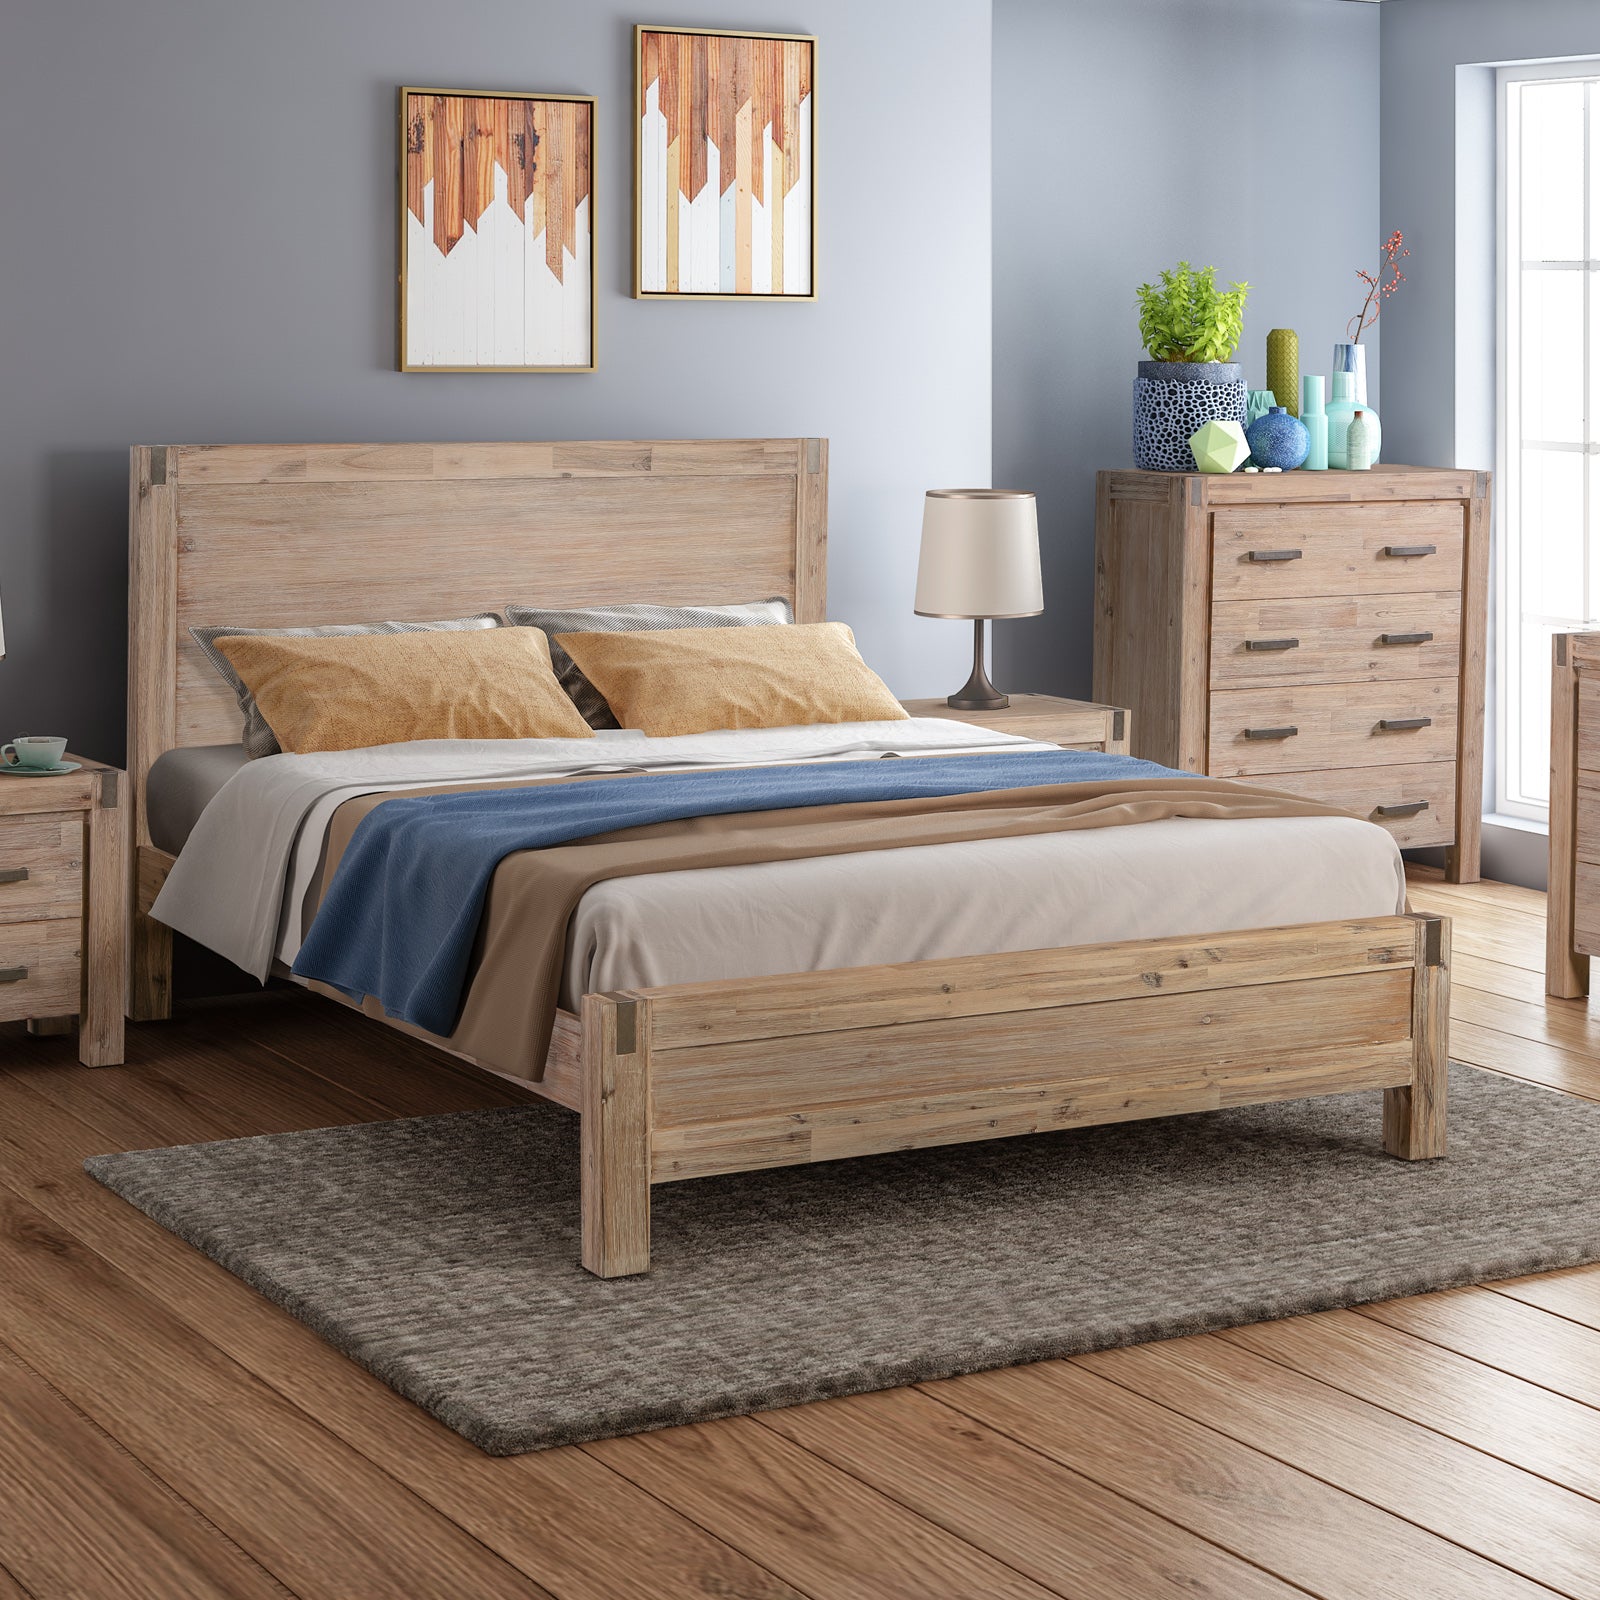 Single size Bed Frame in Solid Acacia Wood with Medium High Headboard in Oak Colour